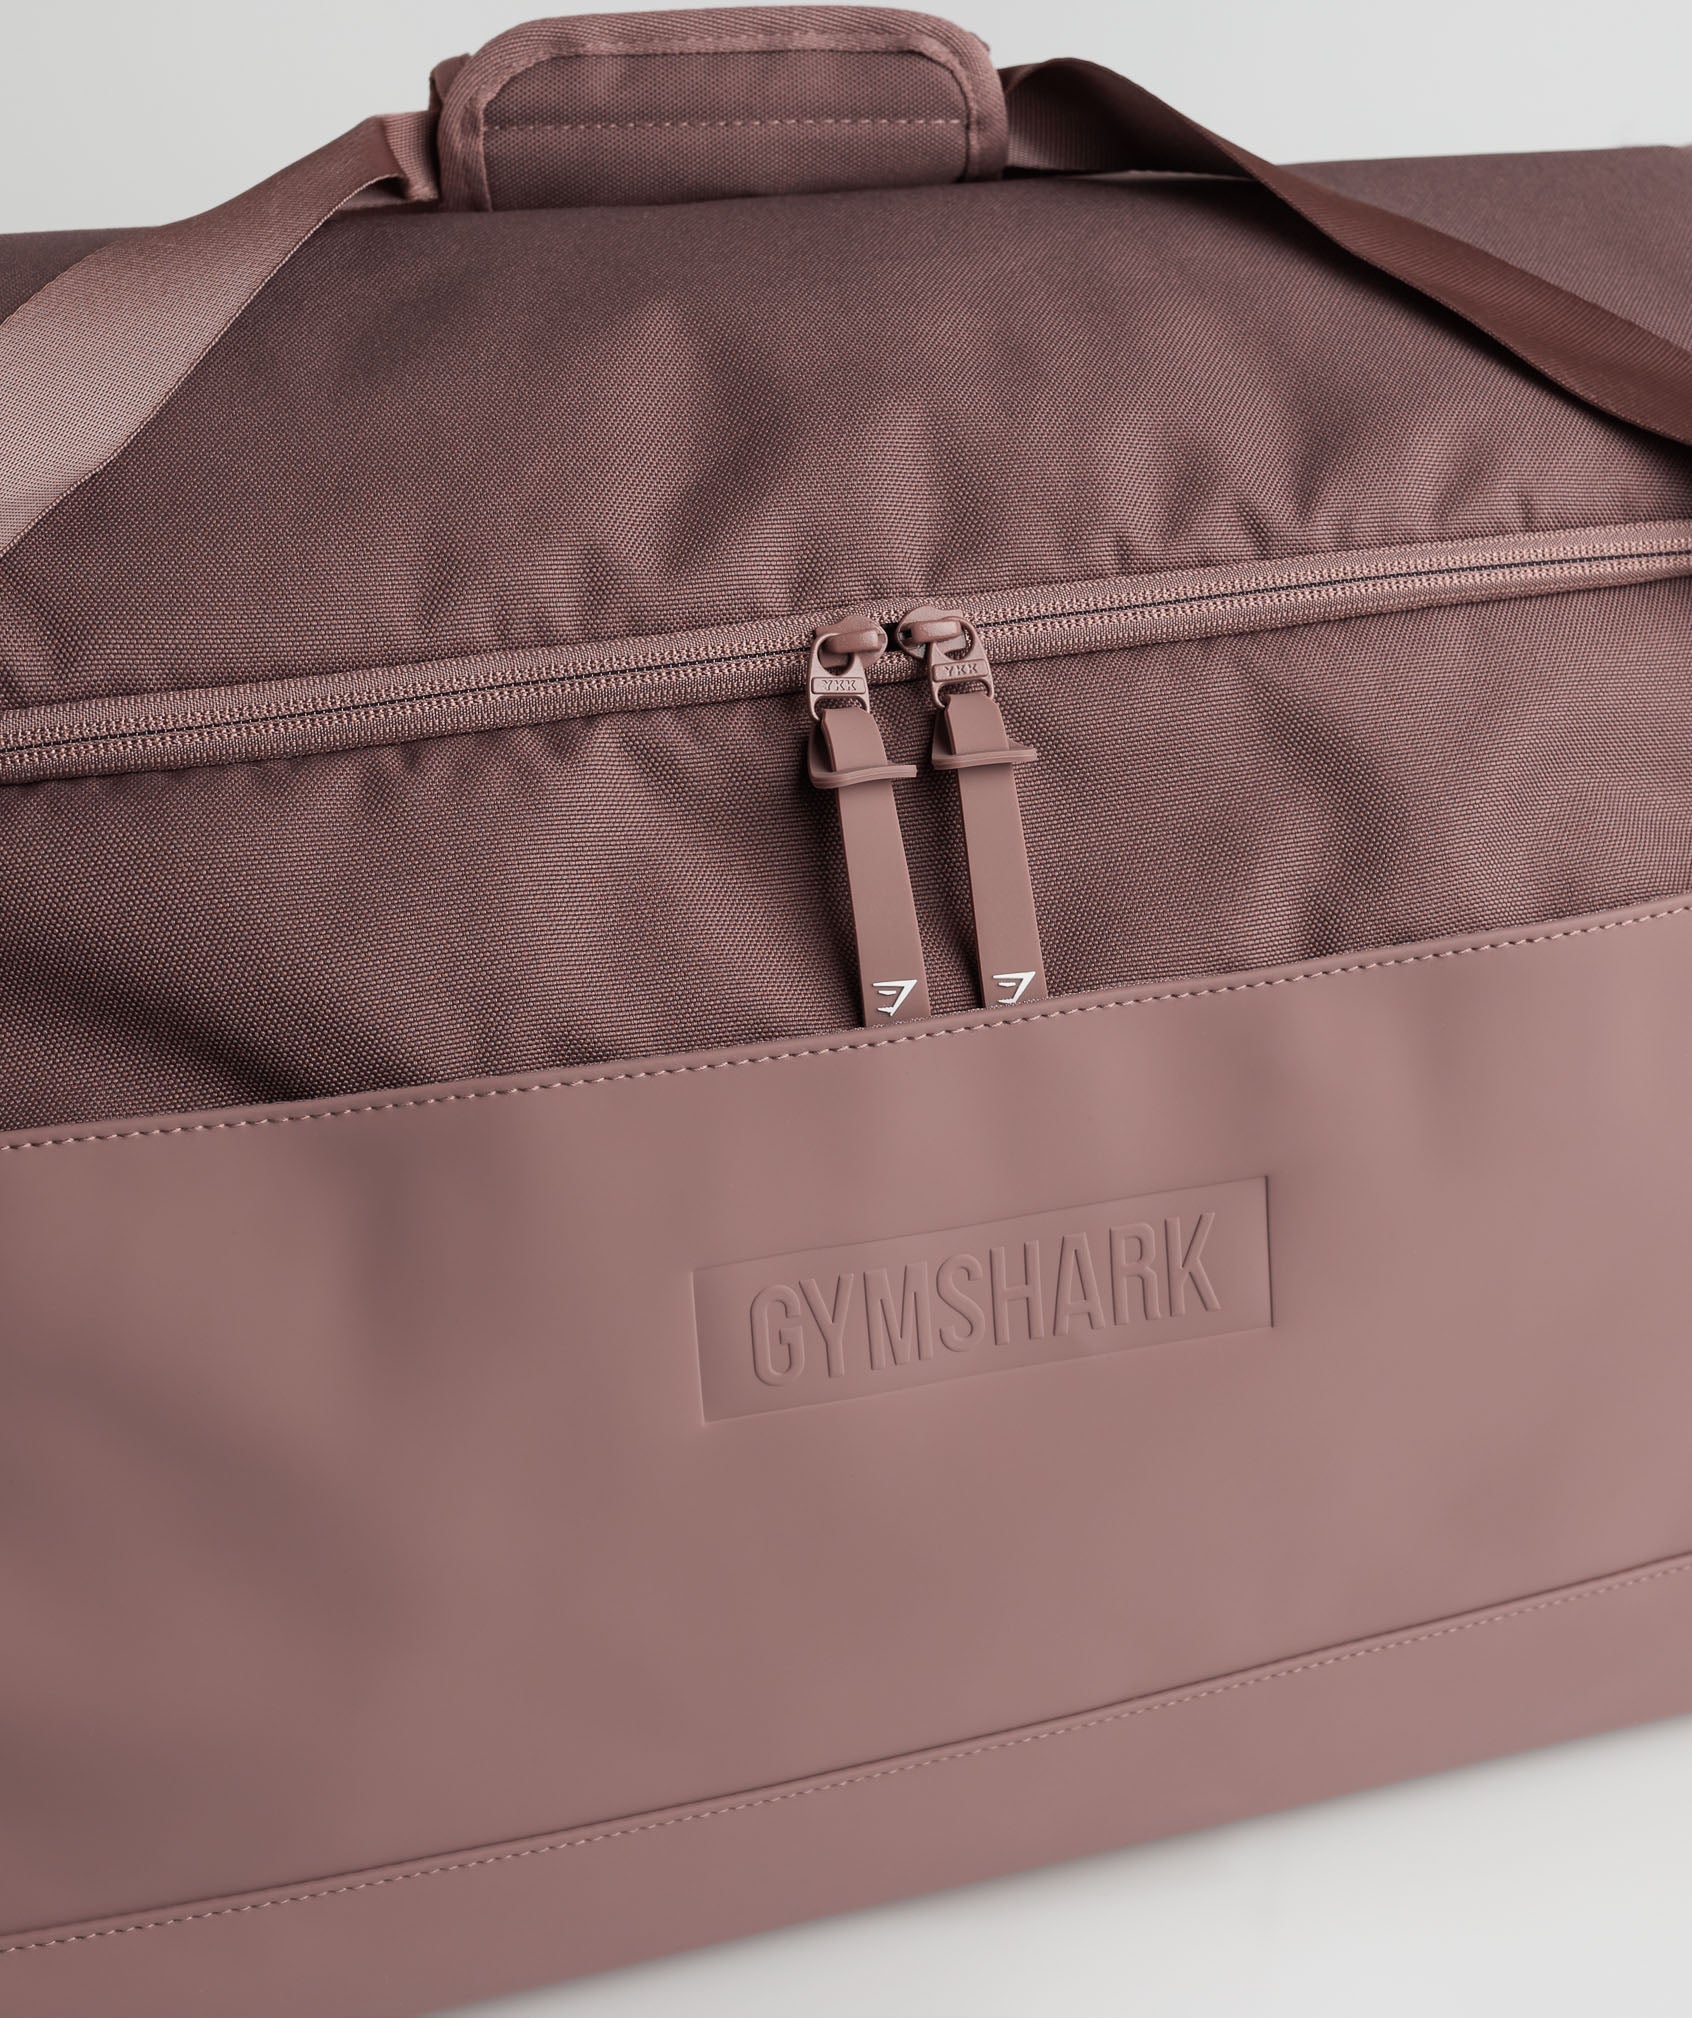 Large Everyday Holdall in Dusty Maroon